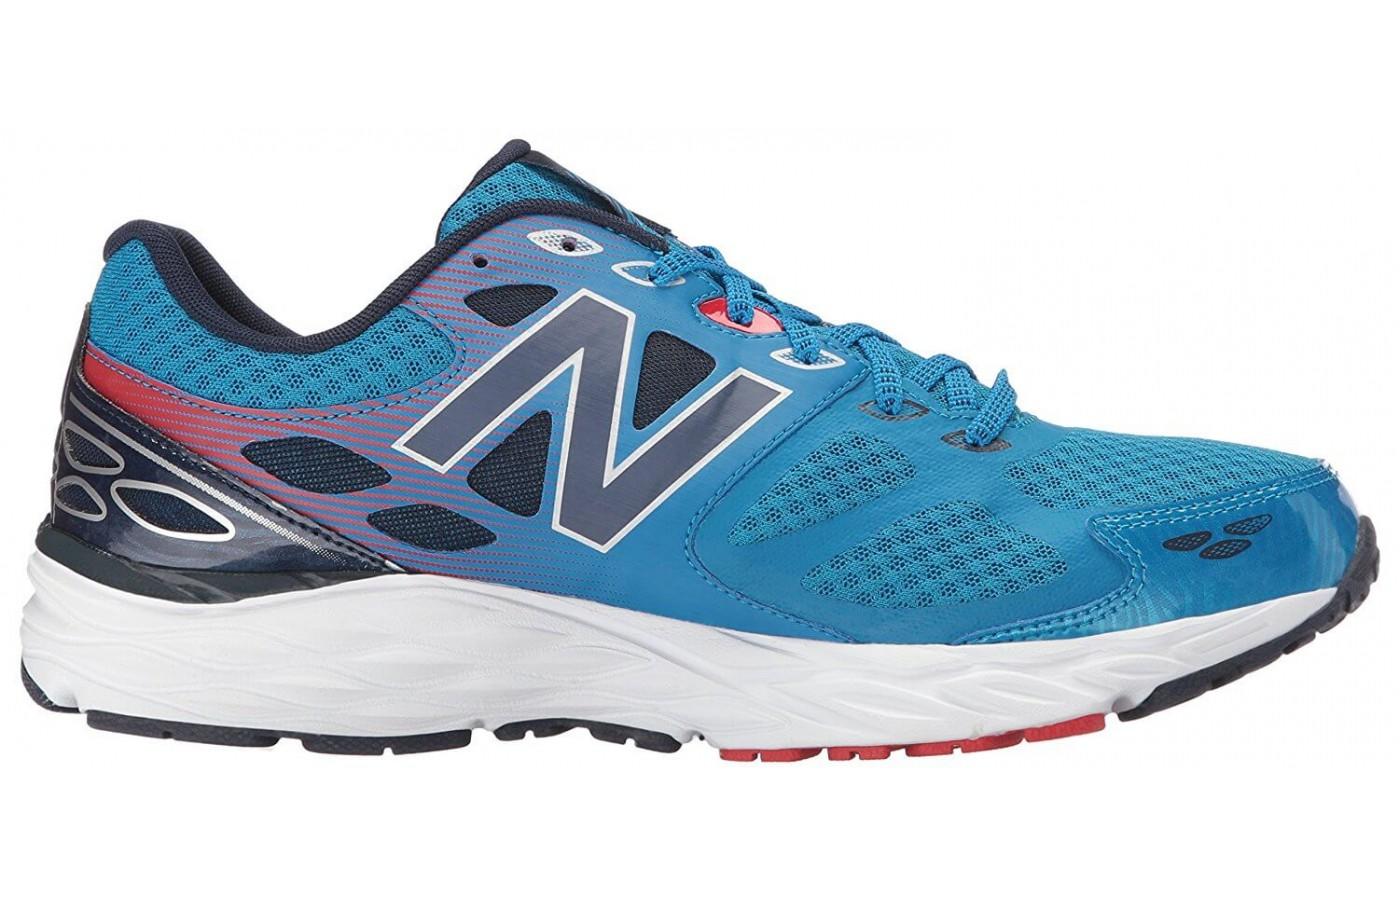 the New Balance 680 v3 is a stylish, colorful trainer